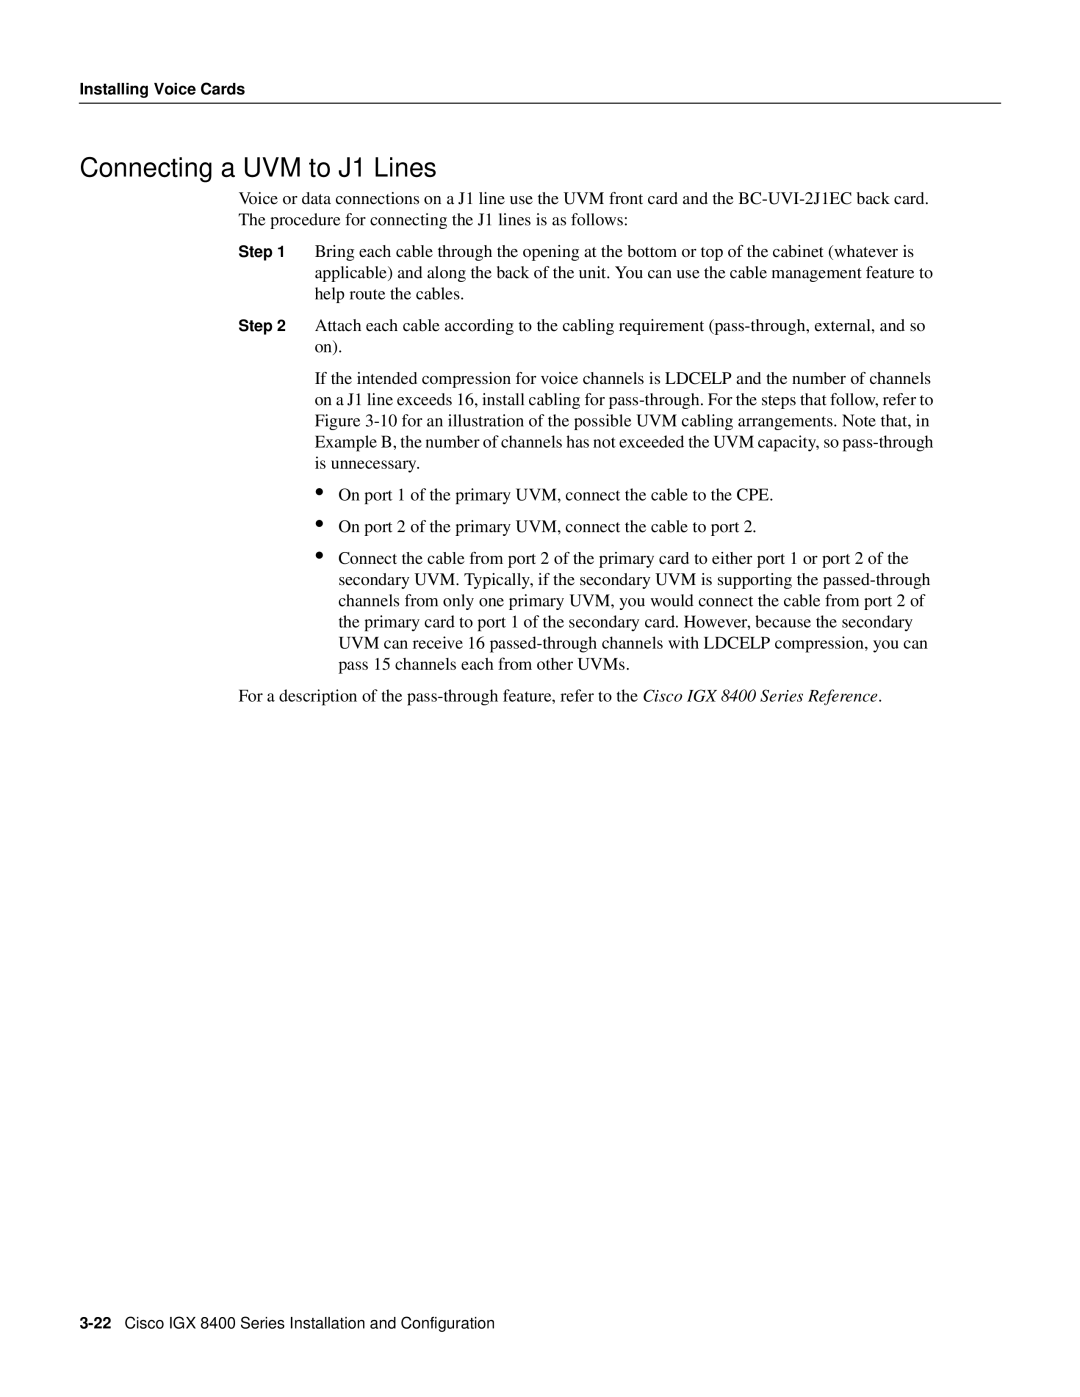 Cisco Systems manual Connecting a UVM to J1 Lines, Cisco IGX 8400 Series Installation and Configuration 